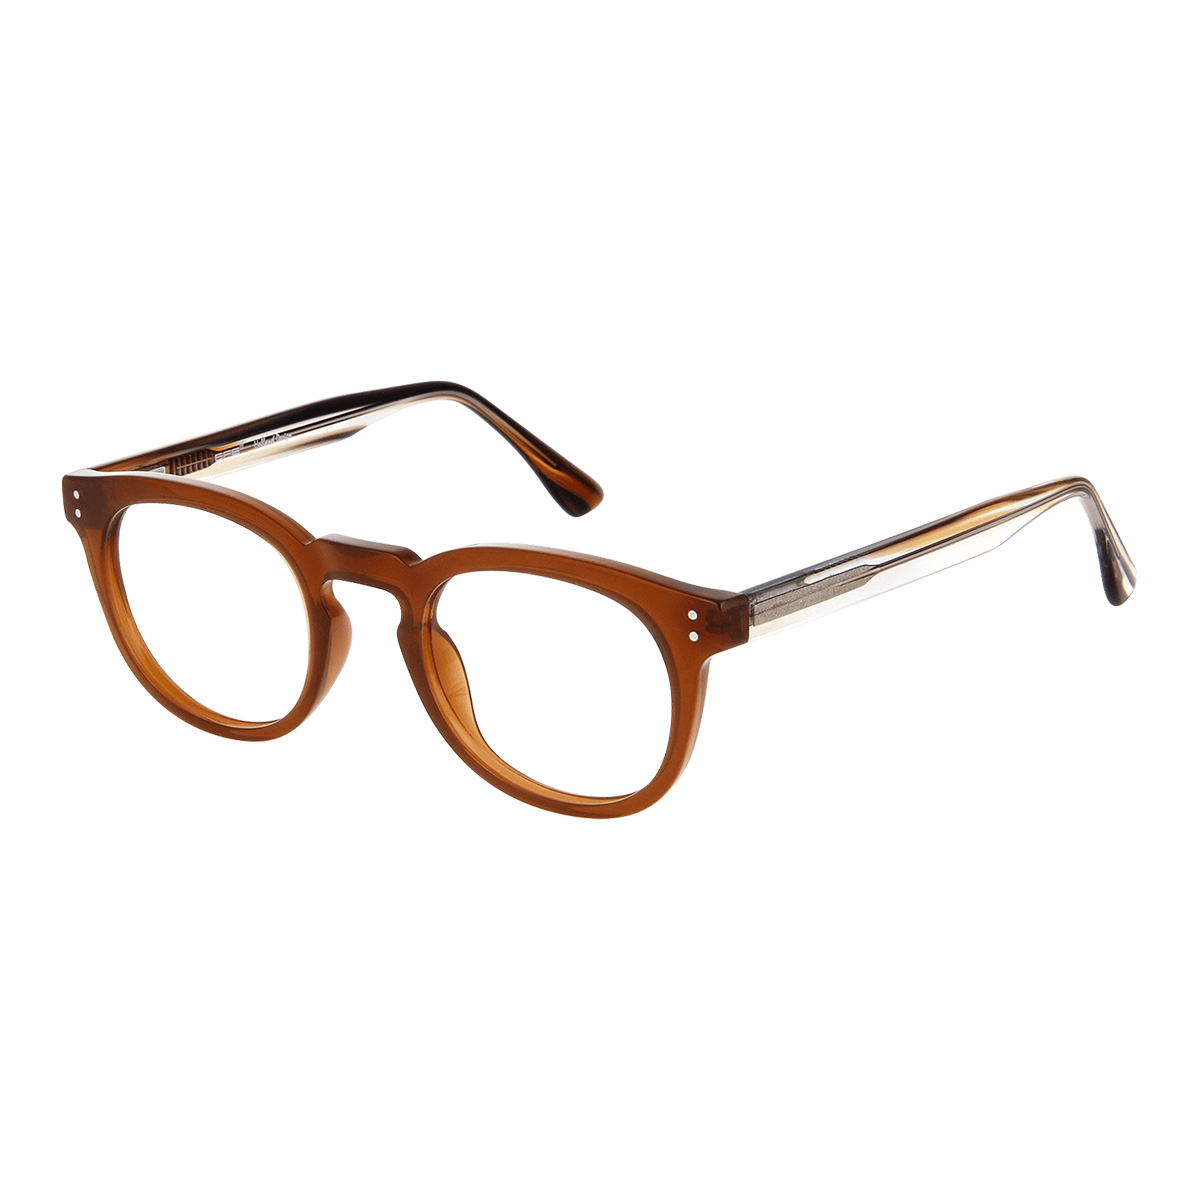 Malis - Round Brown Reading Glasses for Women